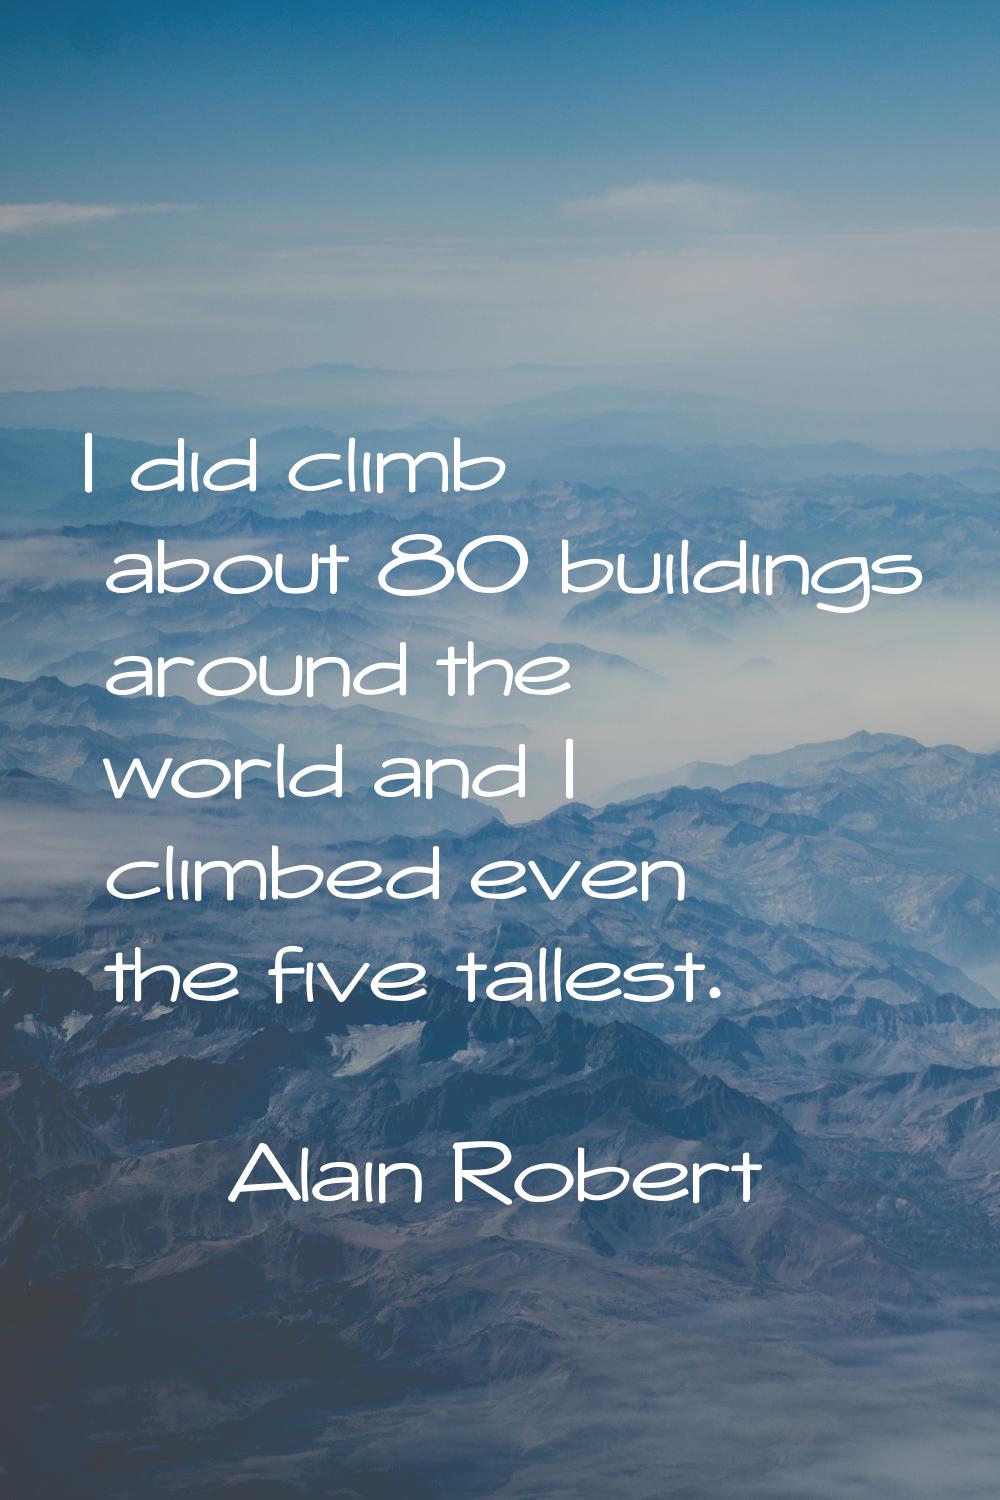 I did climb about 80 buildings around the world and I climbed even the five tallest.